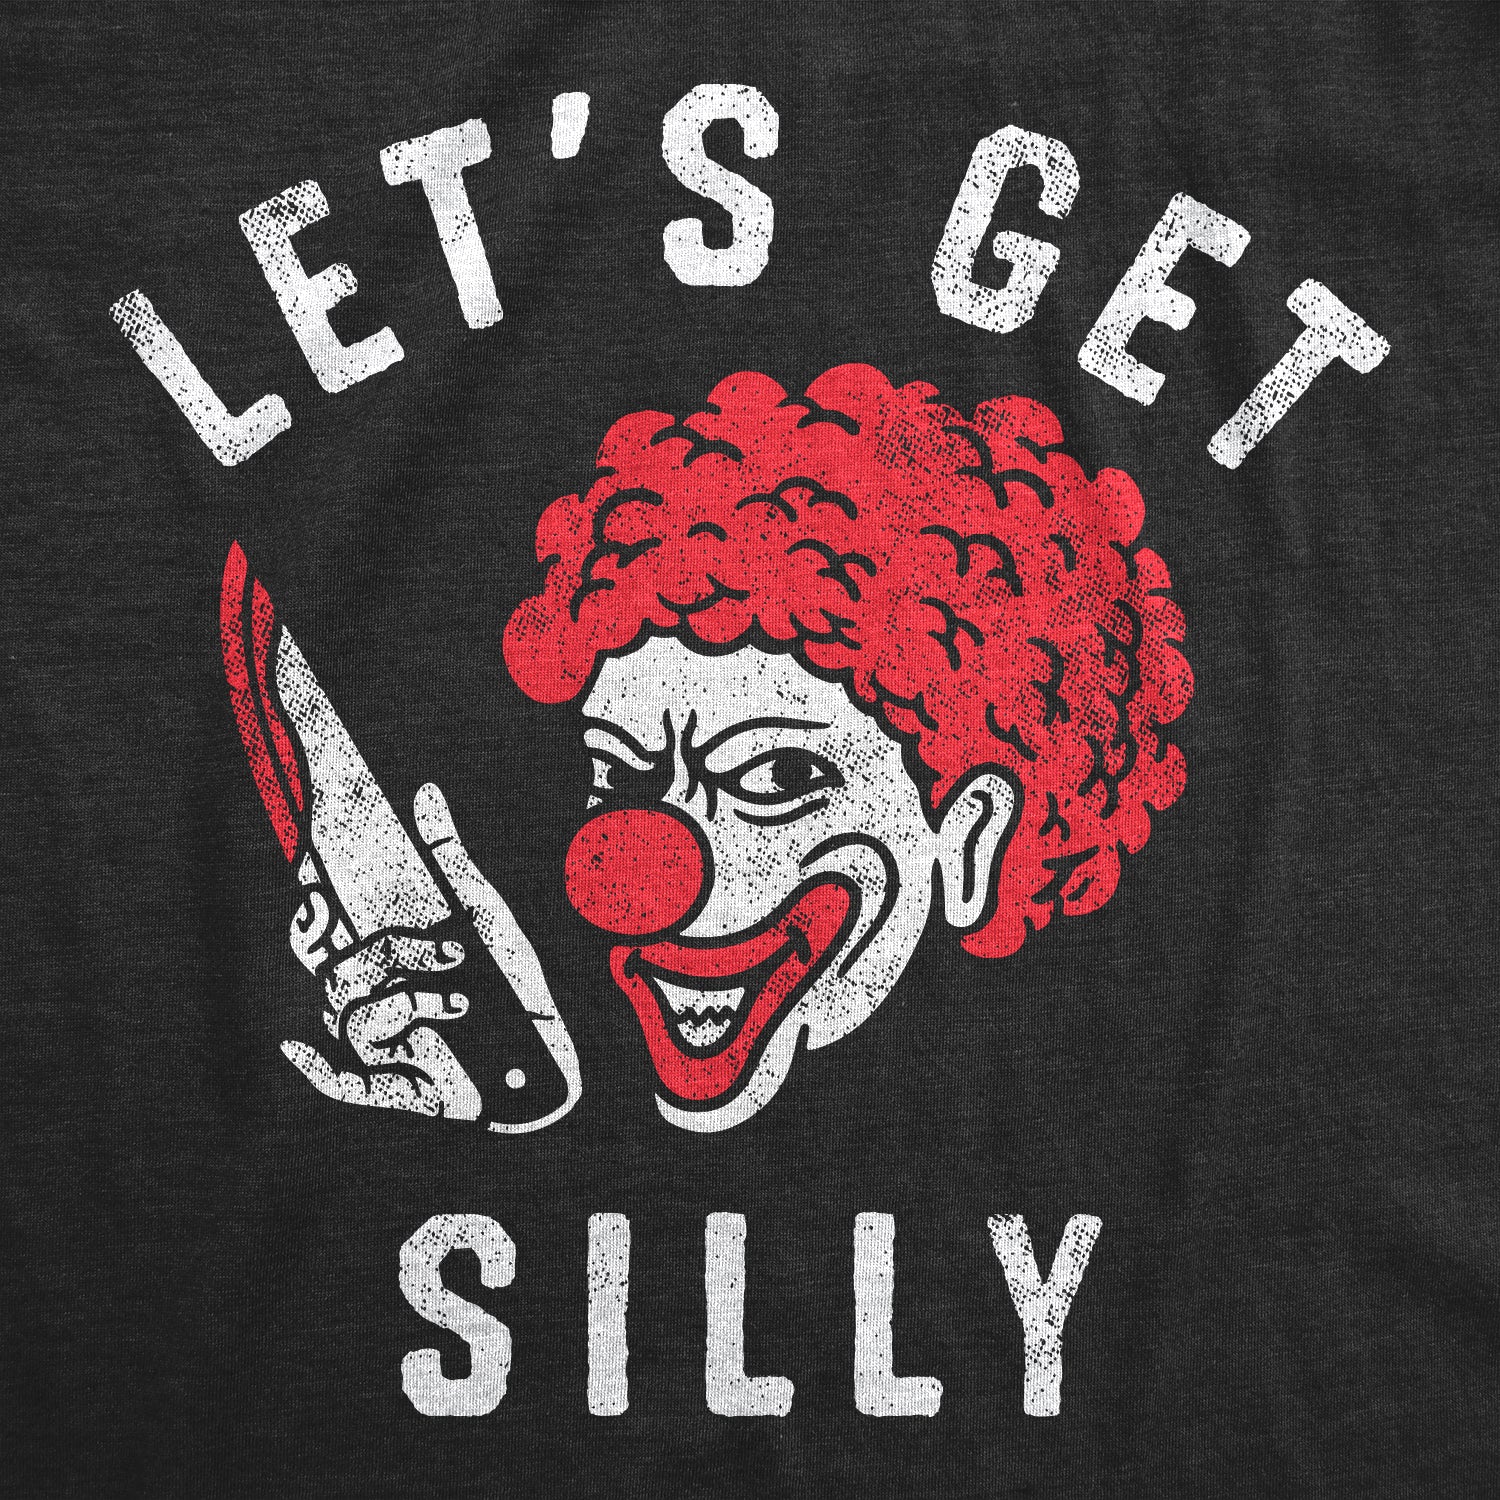 Funny Heather Black - SILLY Lets Get Silly Womens T Shirt Nerdy Halloween Tee